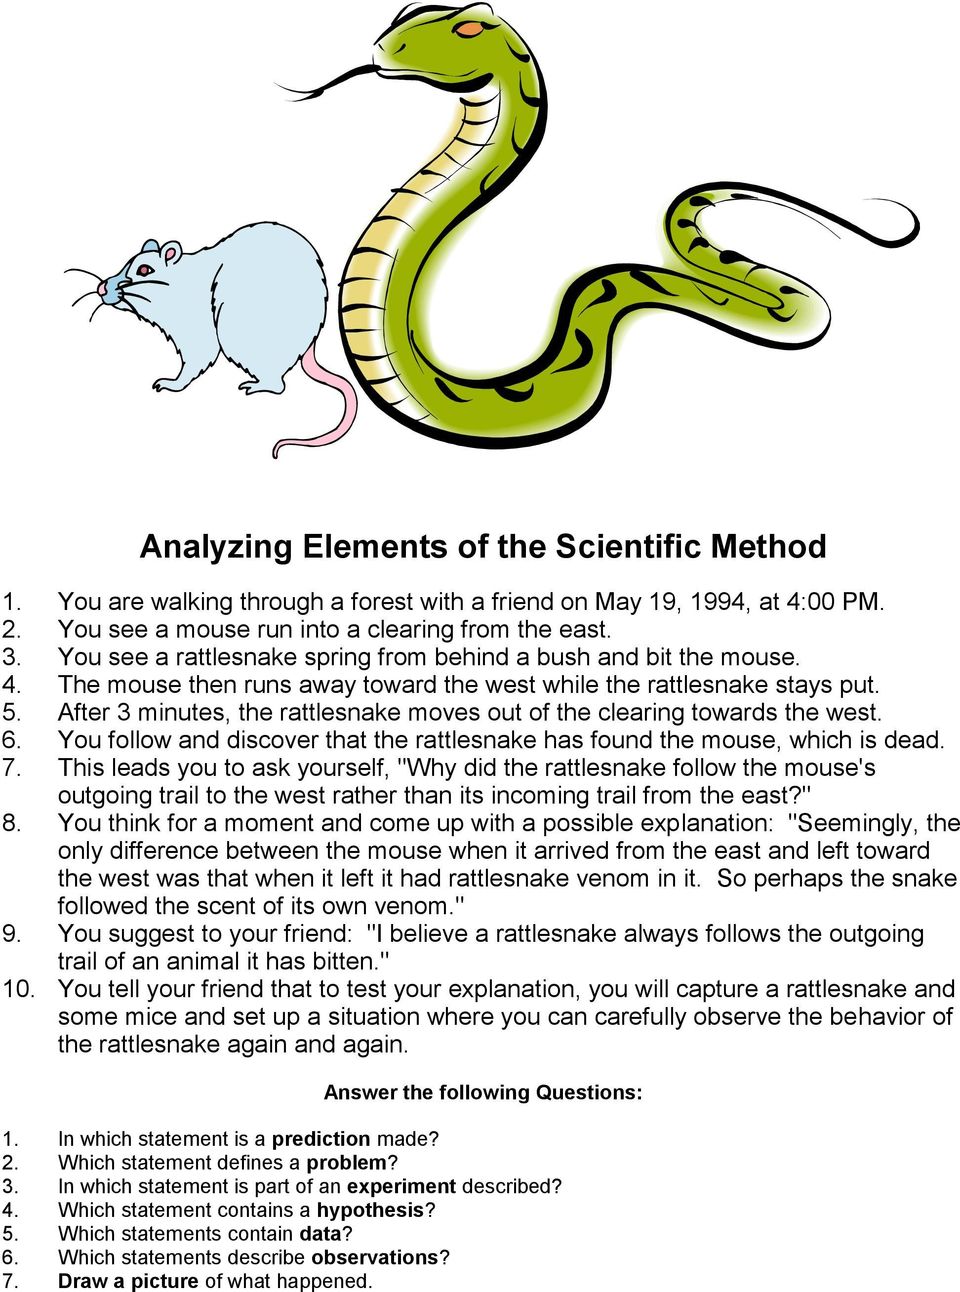 THE SCIENTIFIC METHOD - PDF Free Download With Scientific Method Story Worksheet Answers